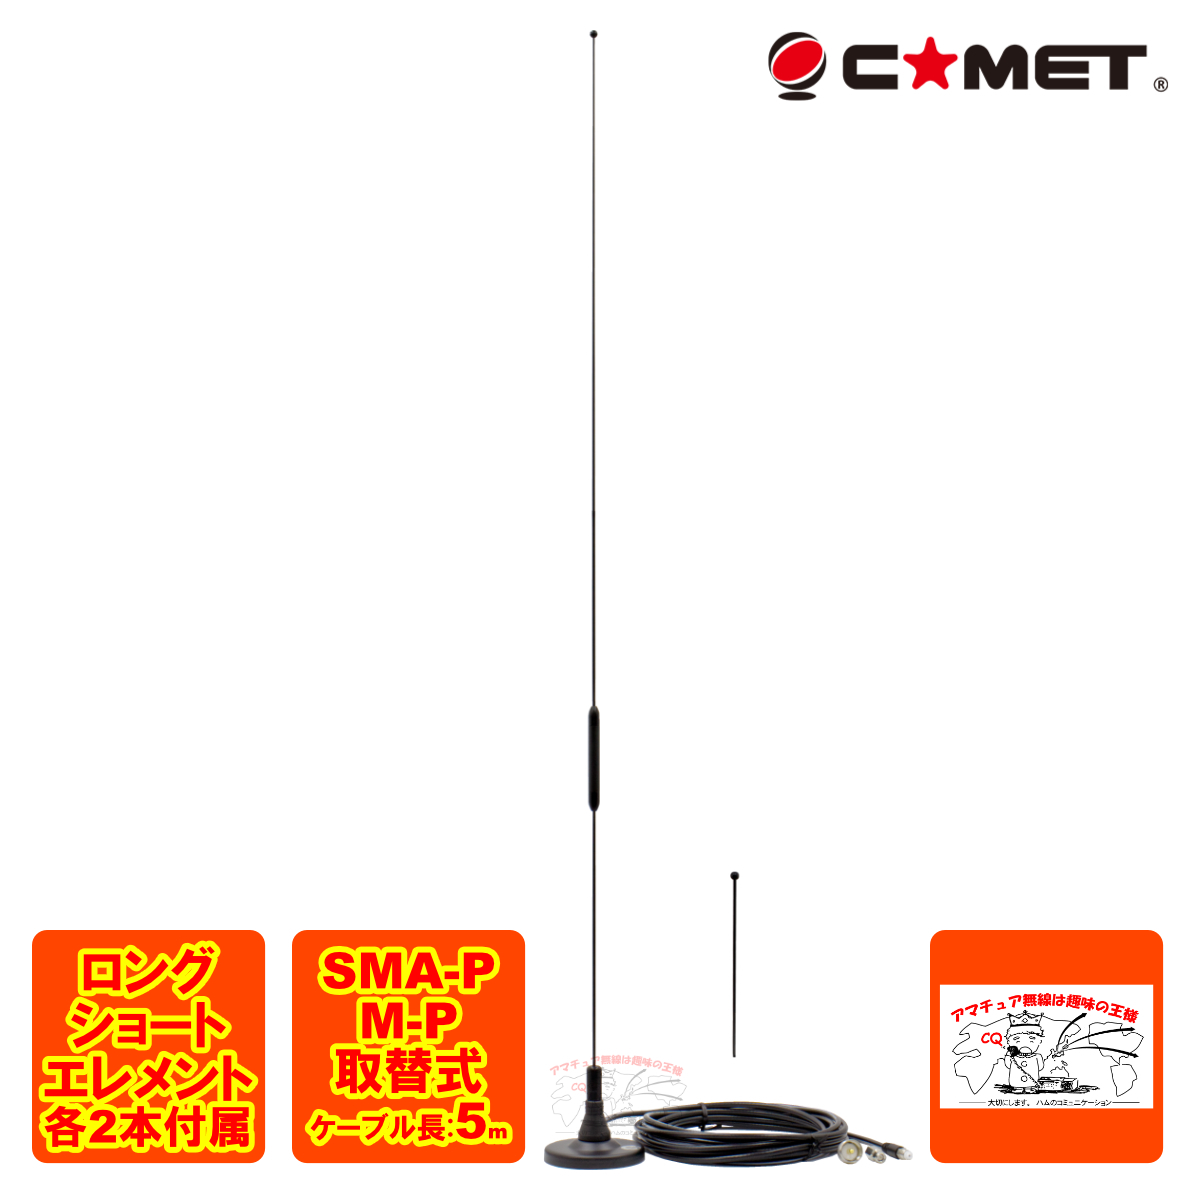 MA-351H comet 351MHz digital simple wireless car magnet height profit antenna MP.SMAP connector Short Element attached 